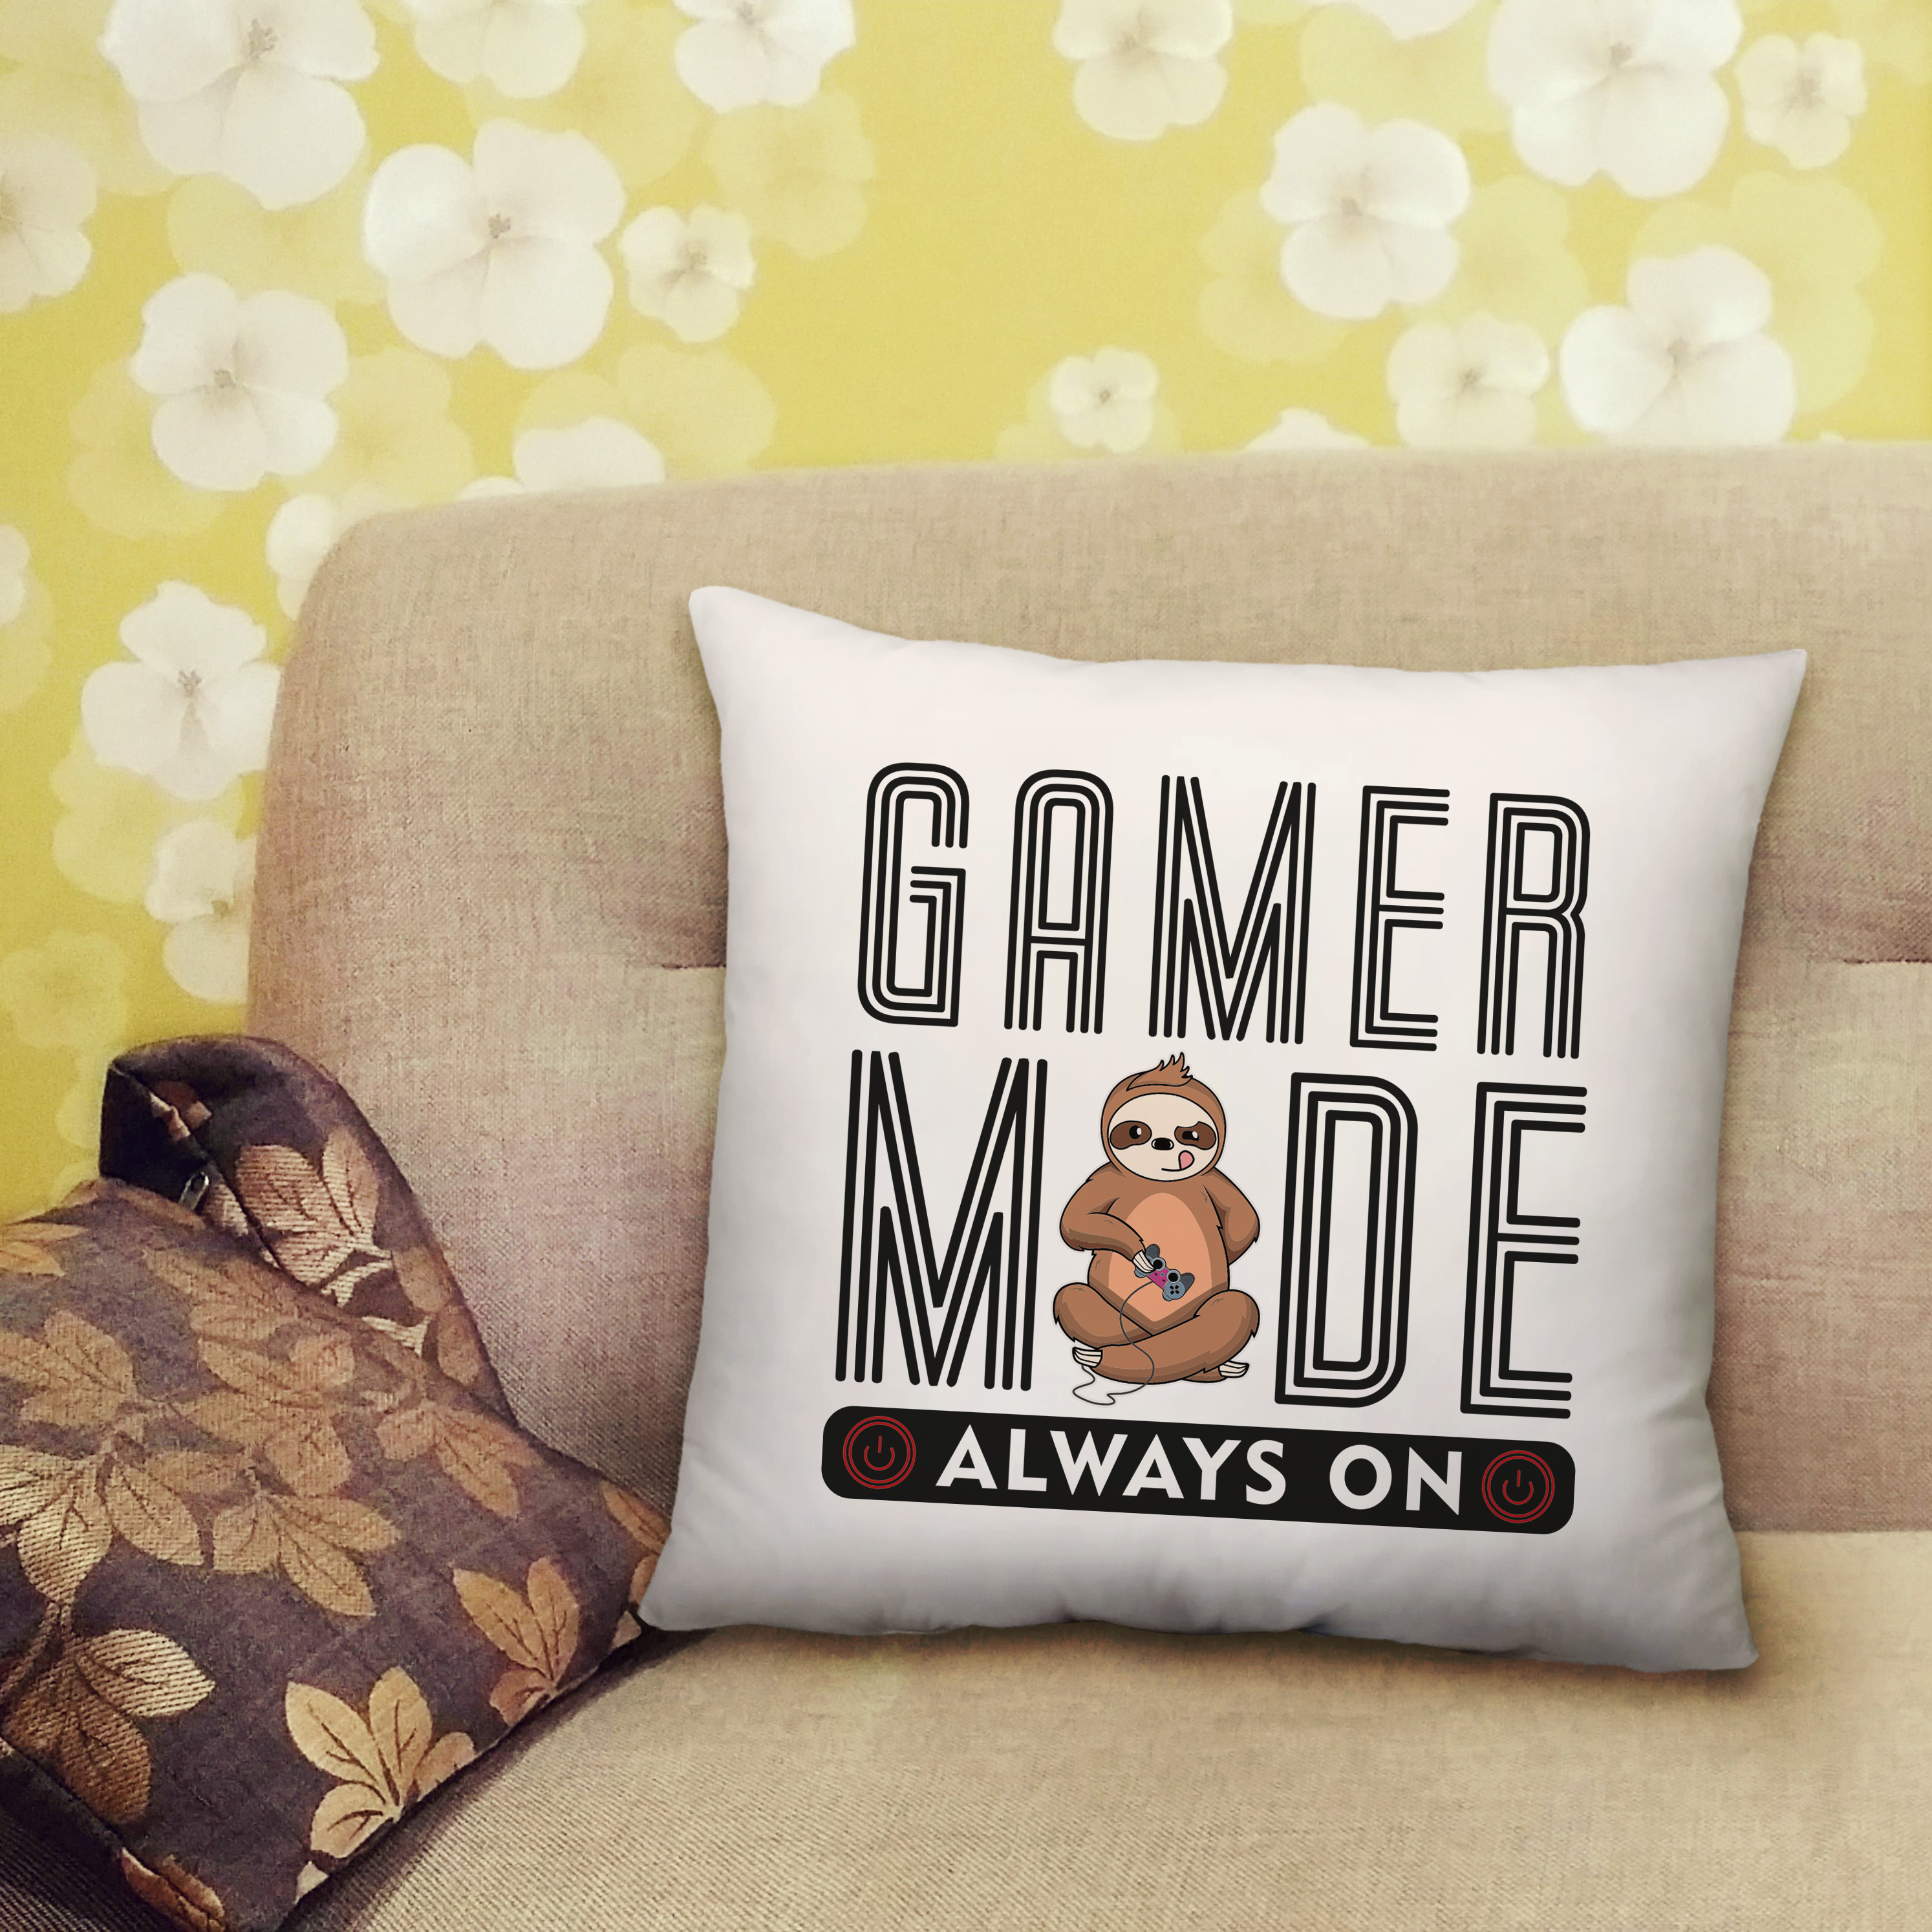 Gamer Mode On Cushion Sloth Video Gaming Arcade Retro Bedroom Lounge - 40cmx40cm - Picture 1 of 1